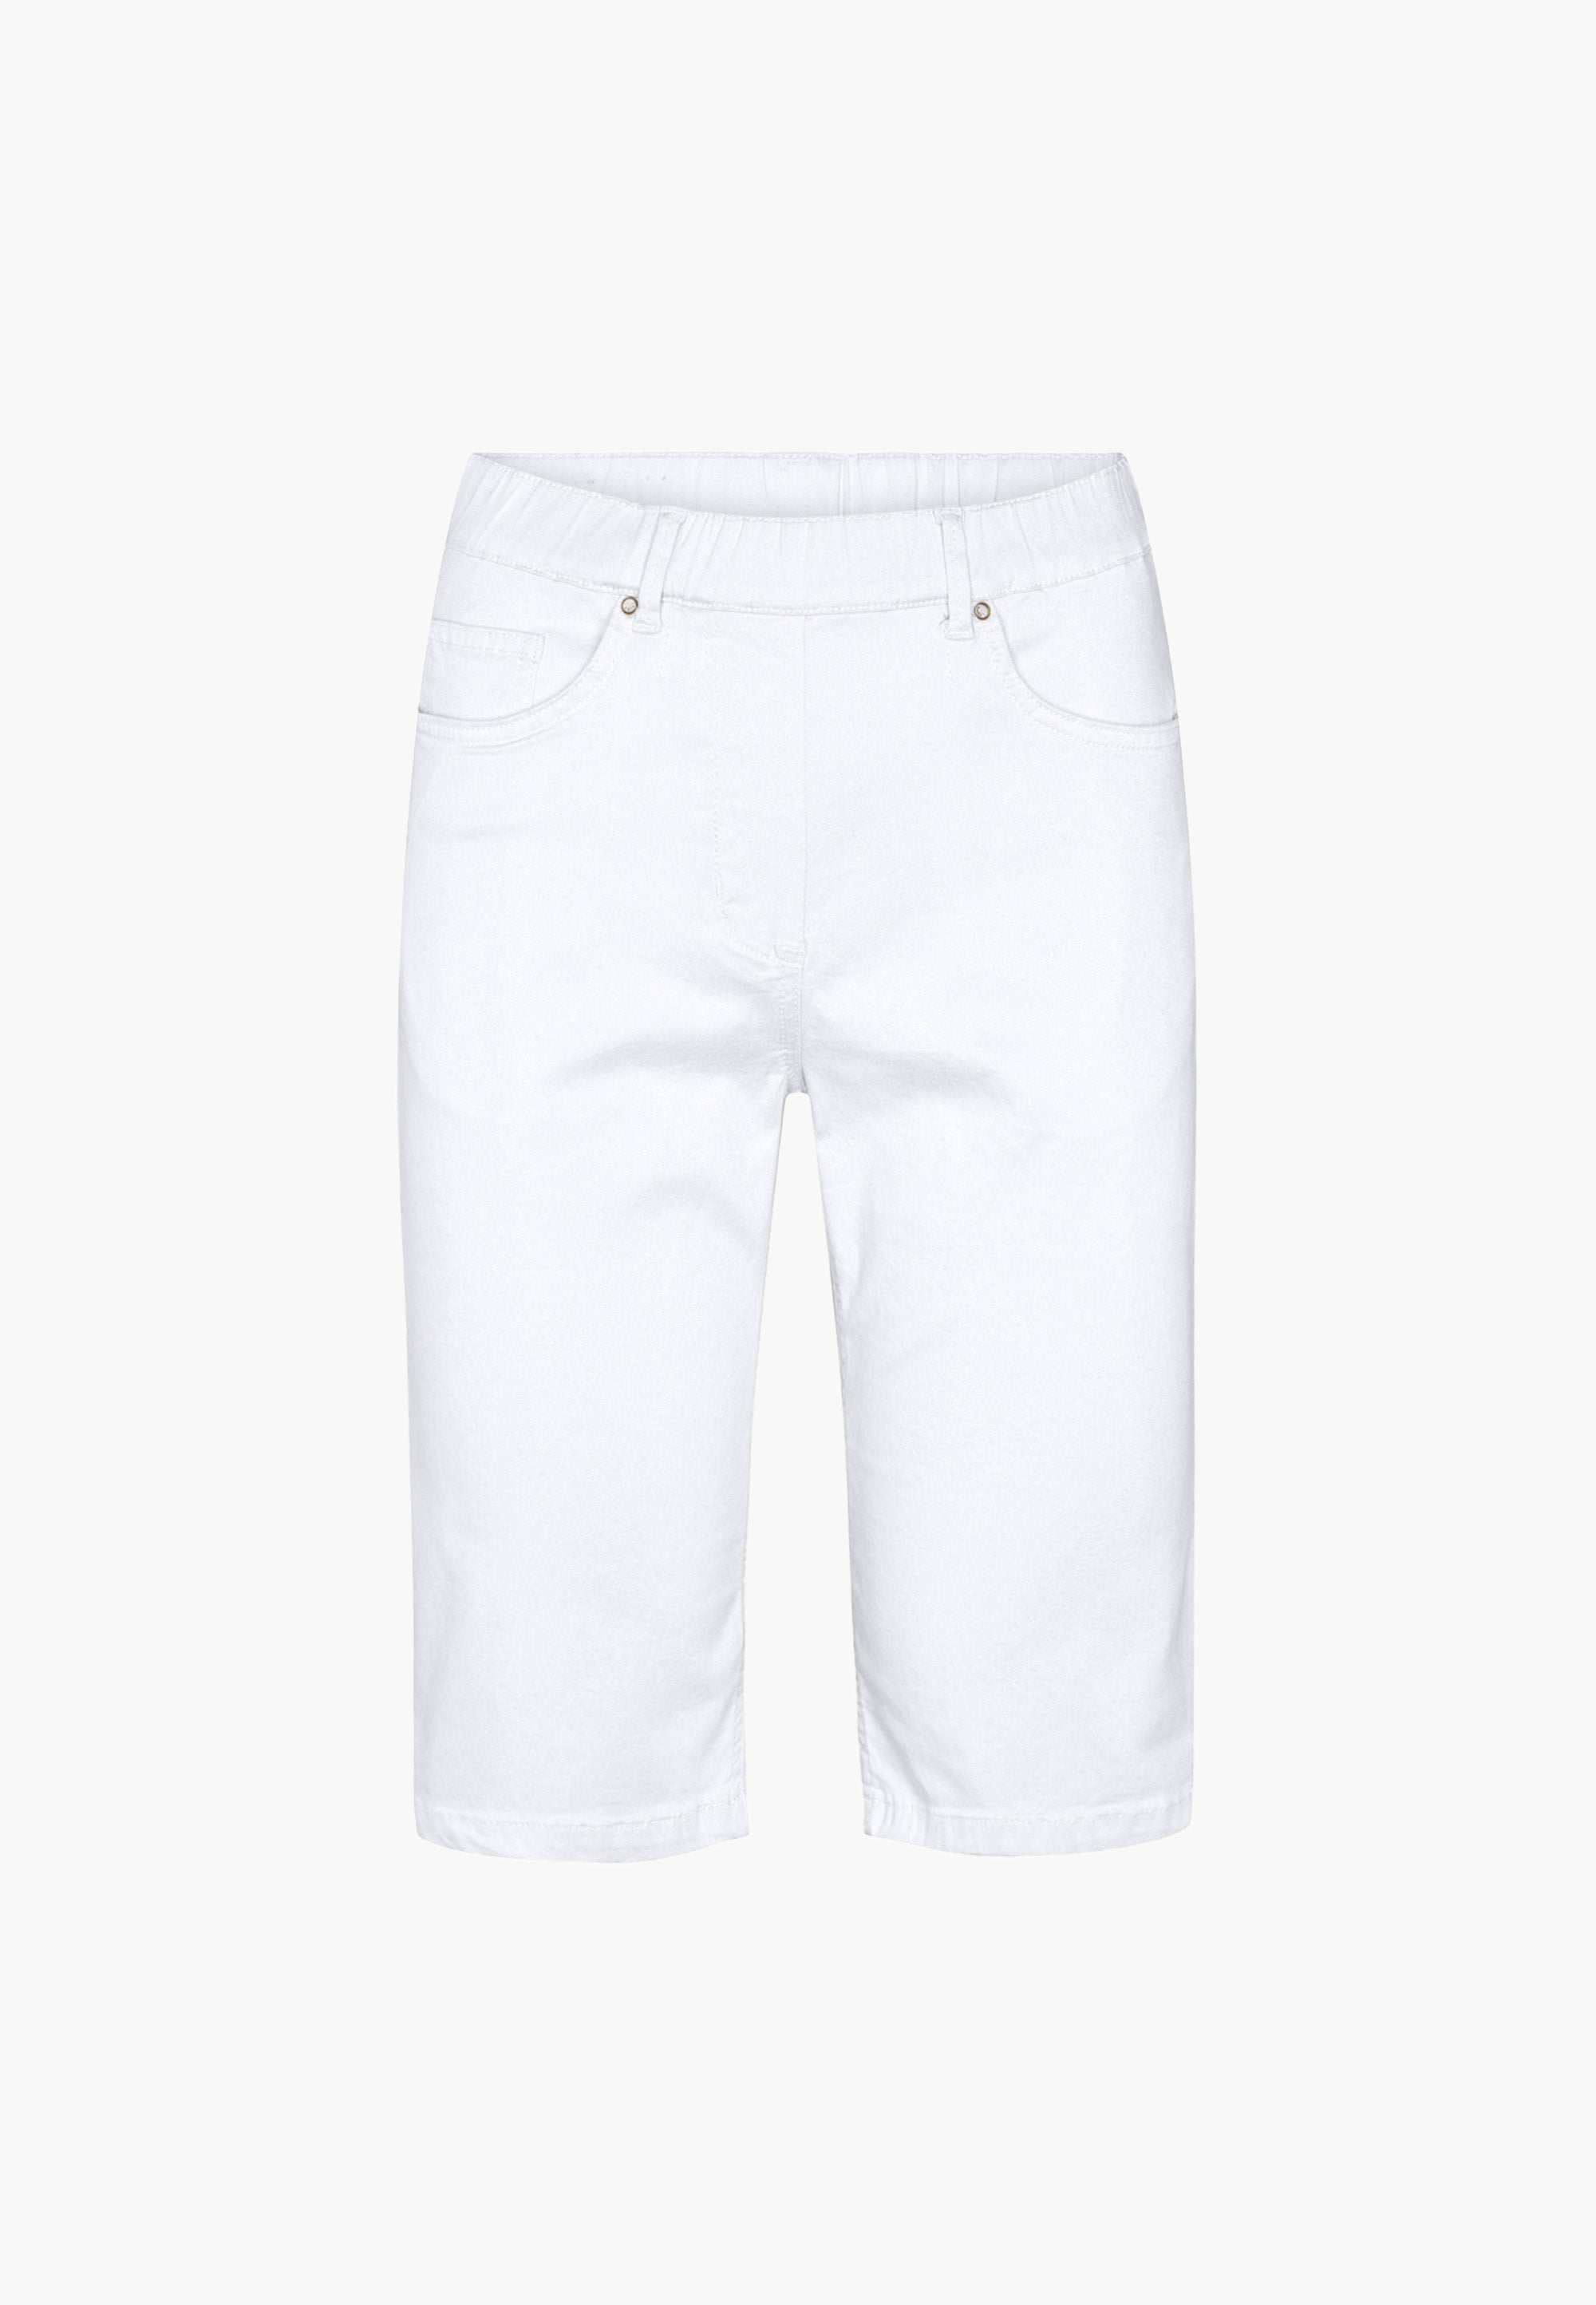 LAURIE Helen Straight Shorts Trousers STRAIGHT 10122 White